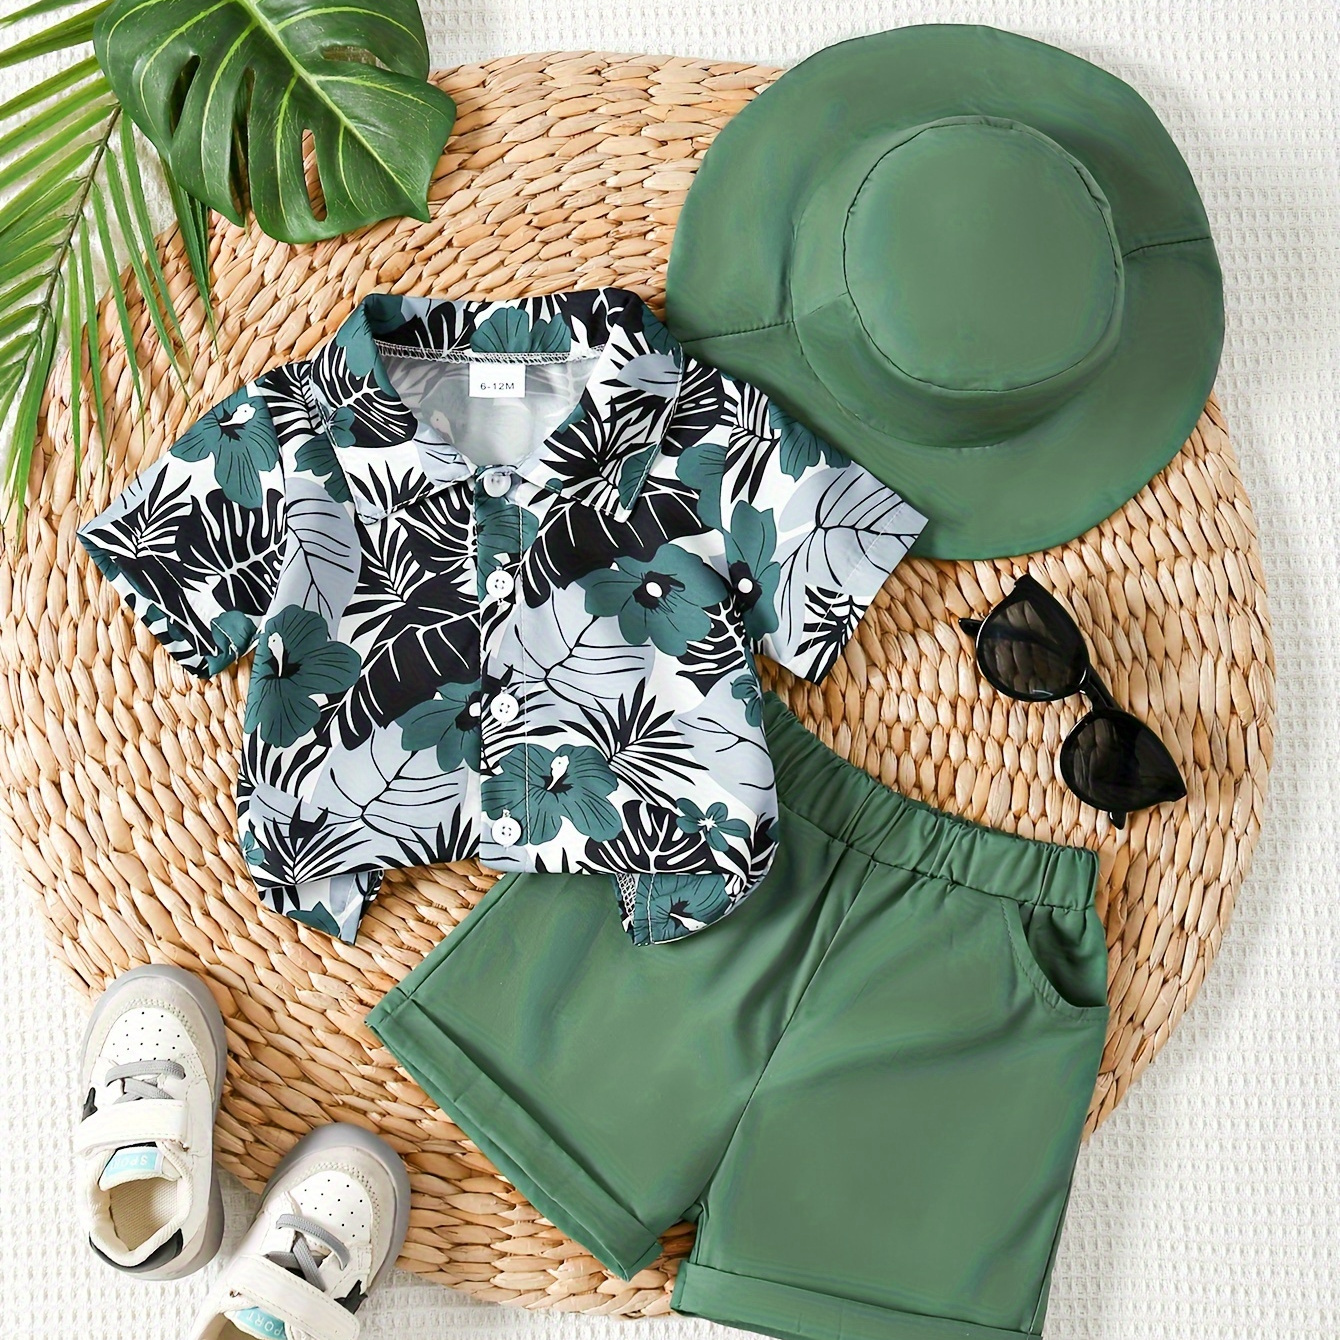 

2pcs Toddler Boys Summer Outfit Set With Floral Print Shirt, Pure Cotton Shorts, And Bucket Hat For Beach & Farm Vacations Casual Style